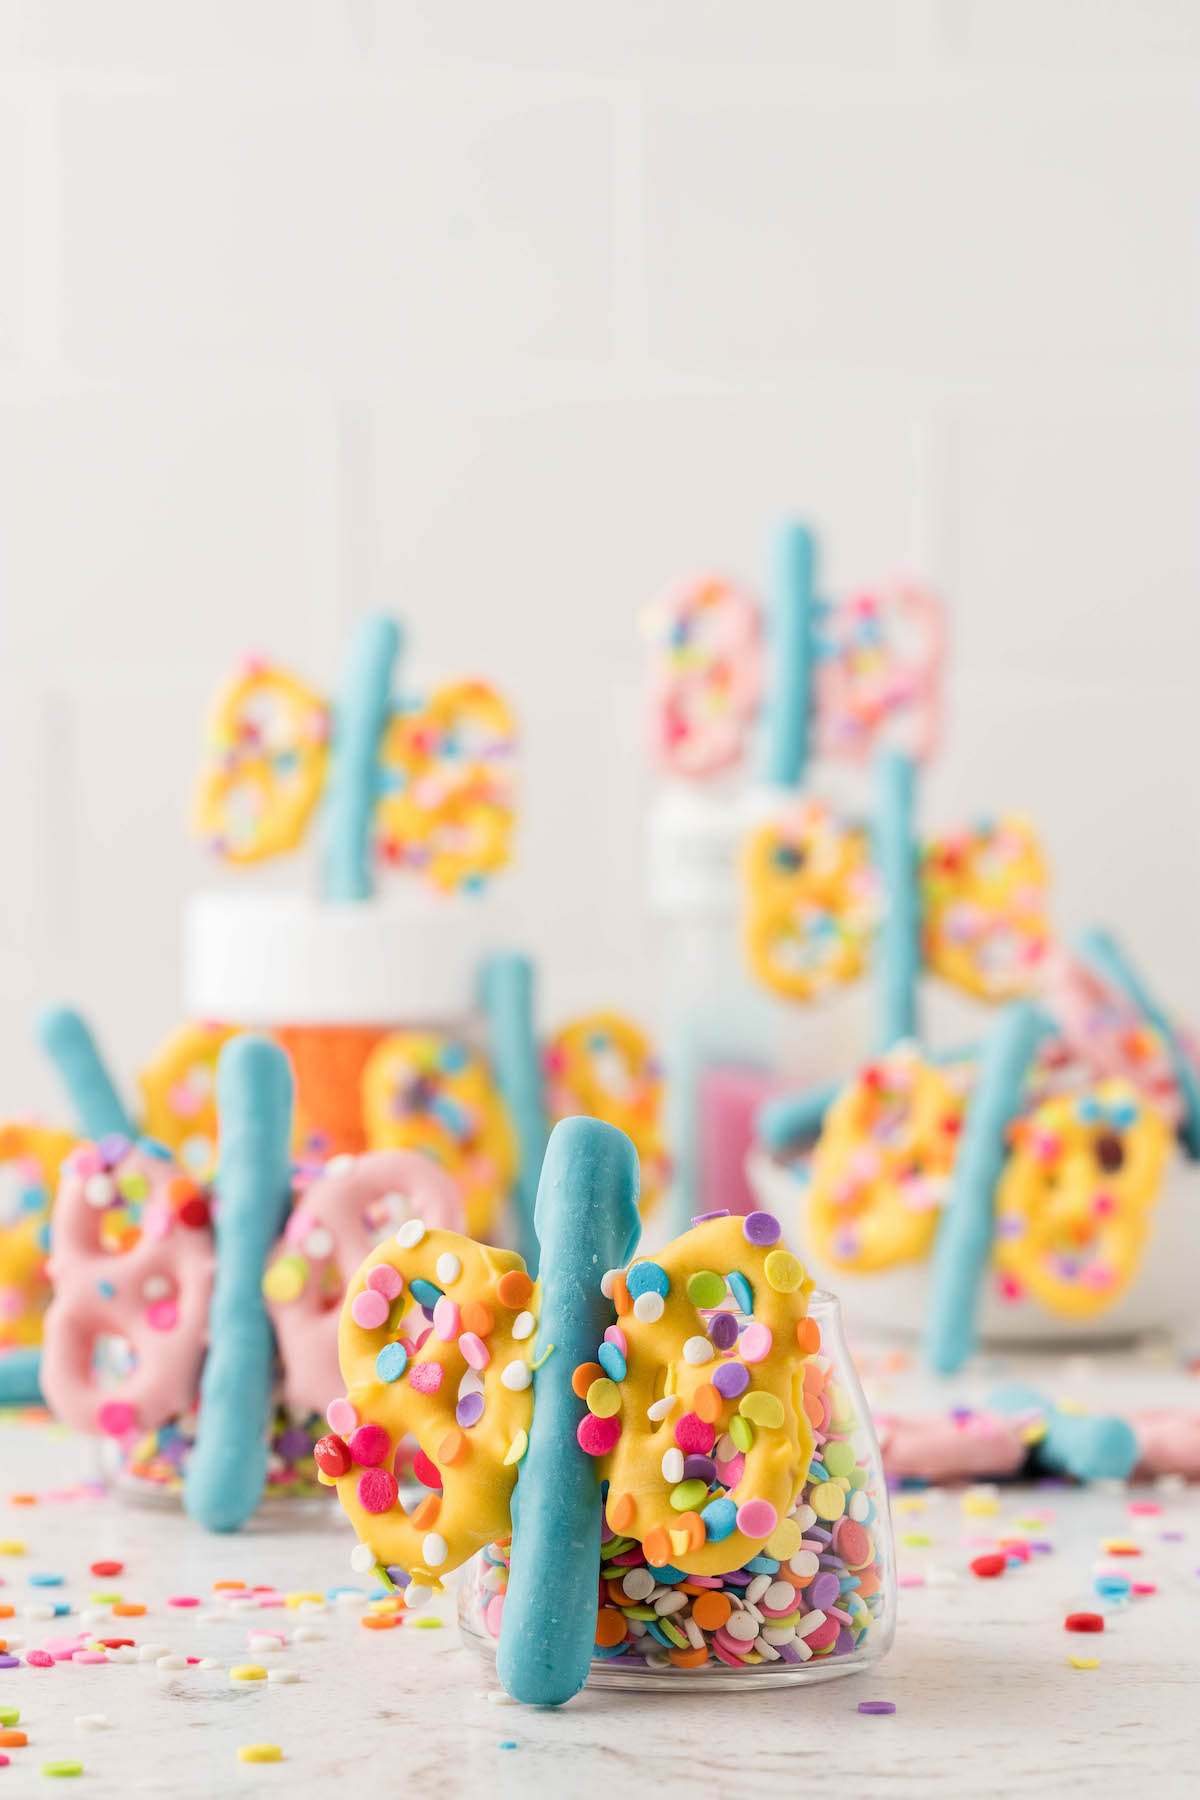 pastel chocolate butterflies resting on little jars filled with sprinkles